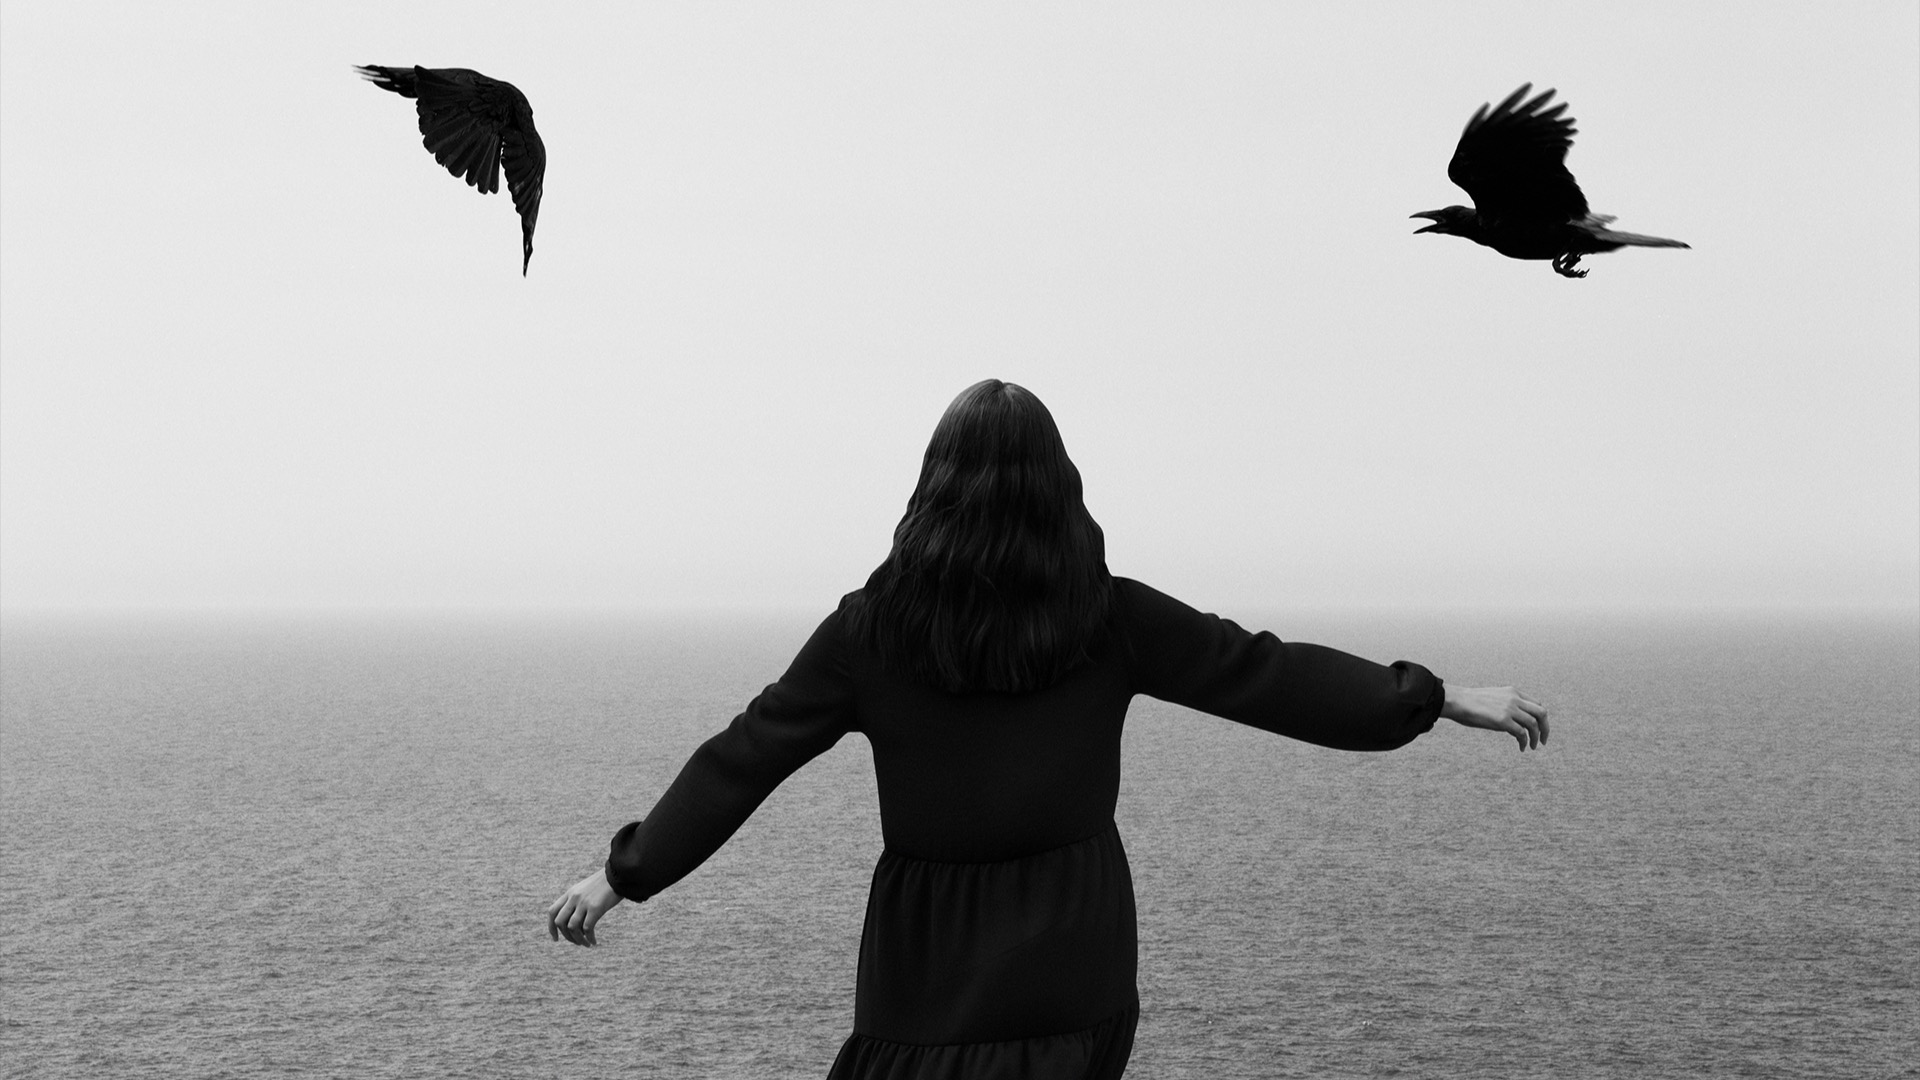 A black and white photo of a person looking at the sea with two crows flying closely above